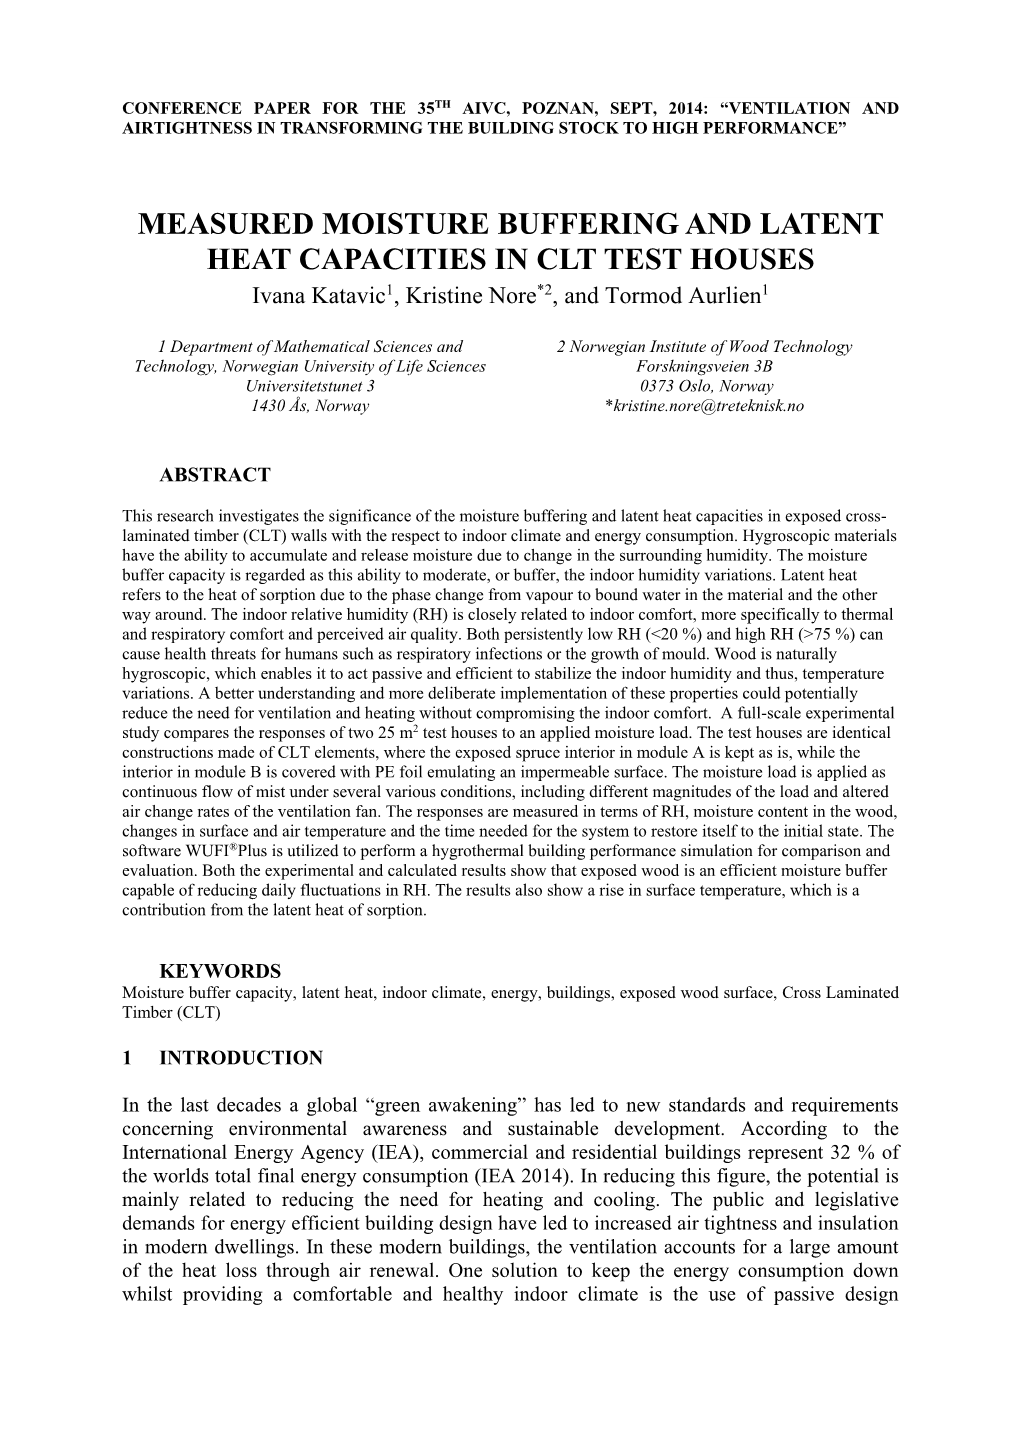 MEASURED MOISTURE BUFFERING and LATENT HEAT CAPACITIES in CLT TEST HOUSES Ivana Katavic1, Kristine Nore*2, and Tormod Aurlien1